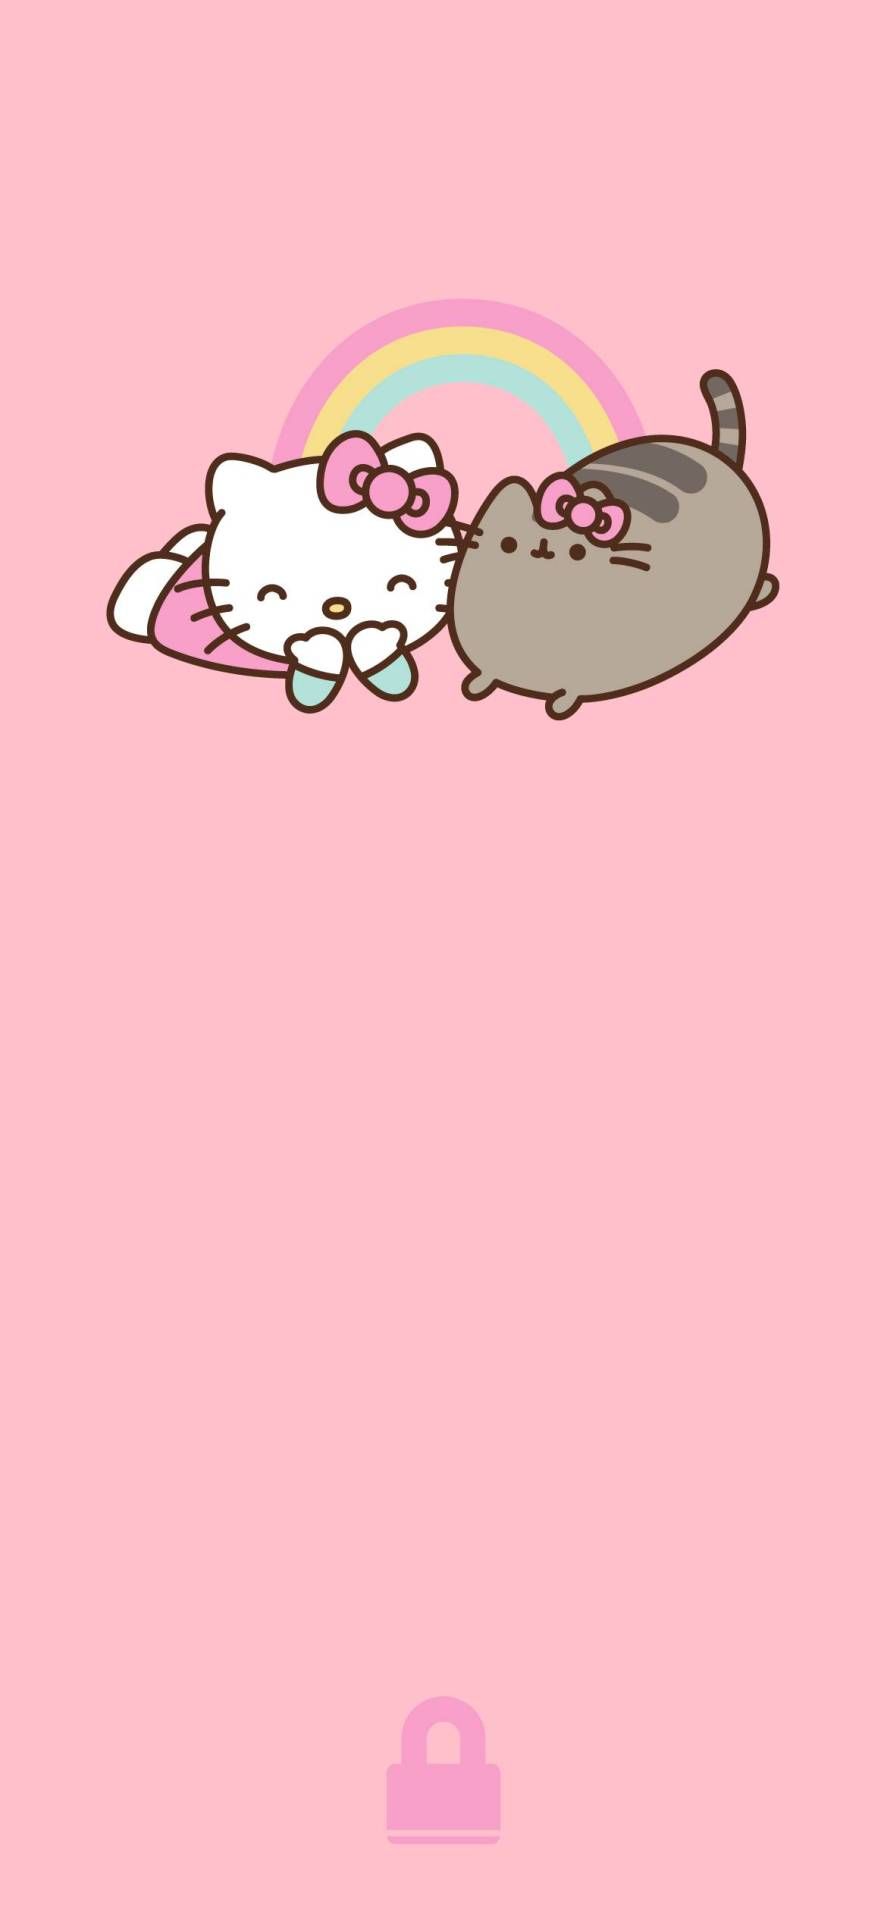 A cute cat and kitten are sitting on the ground - Hello Kitty